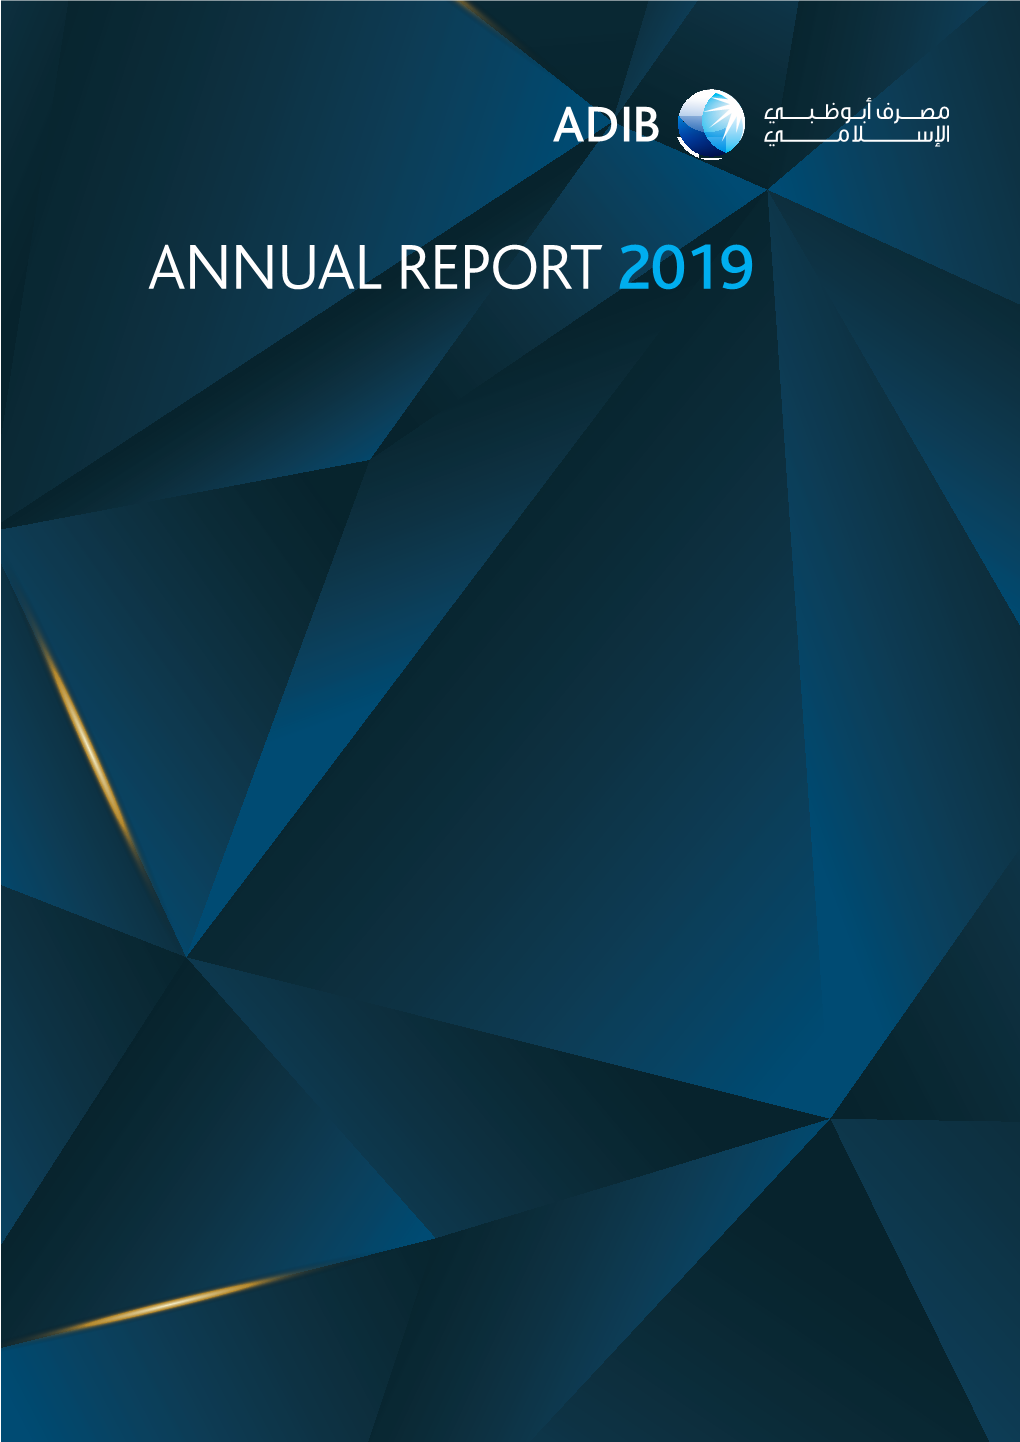 ANNUAL REPORT 2019 Contents